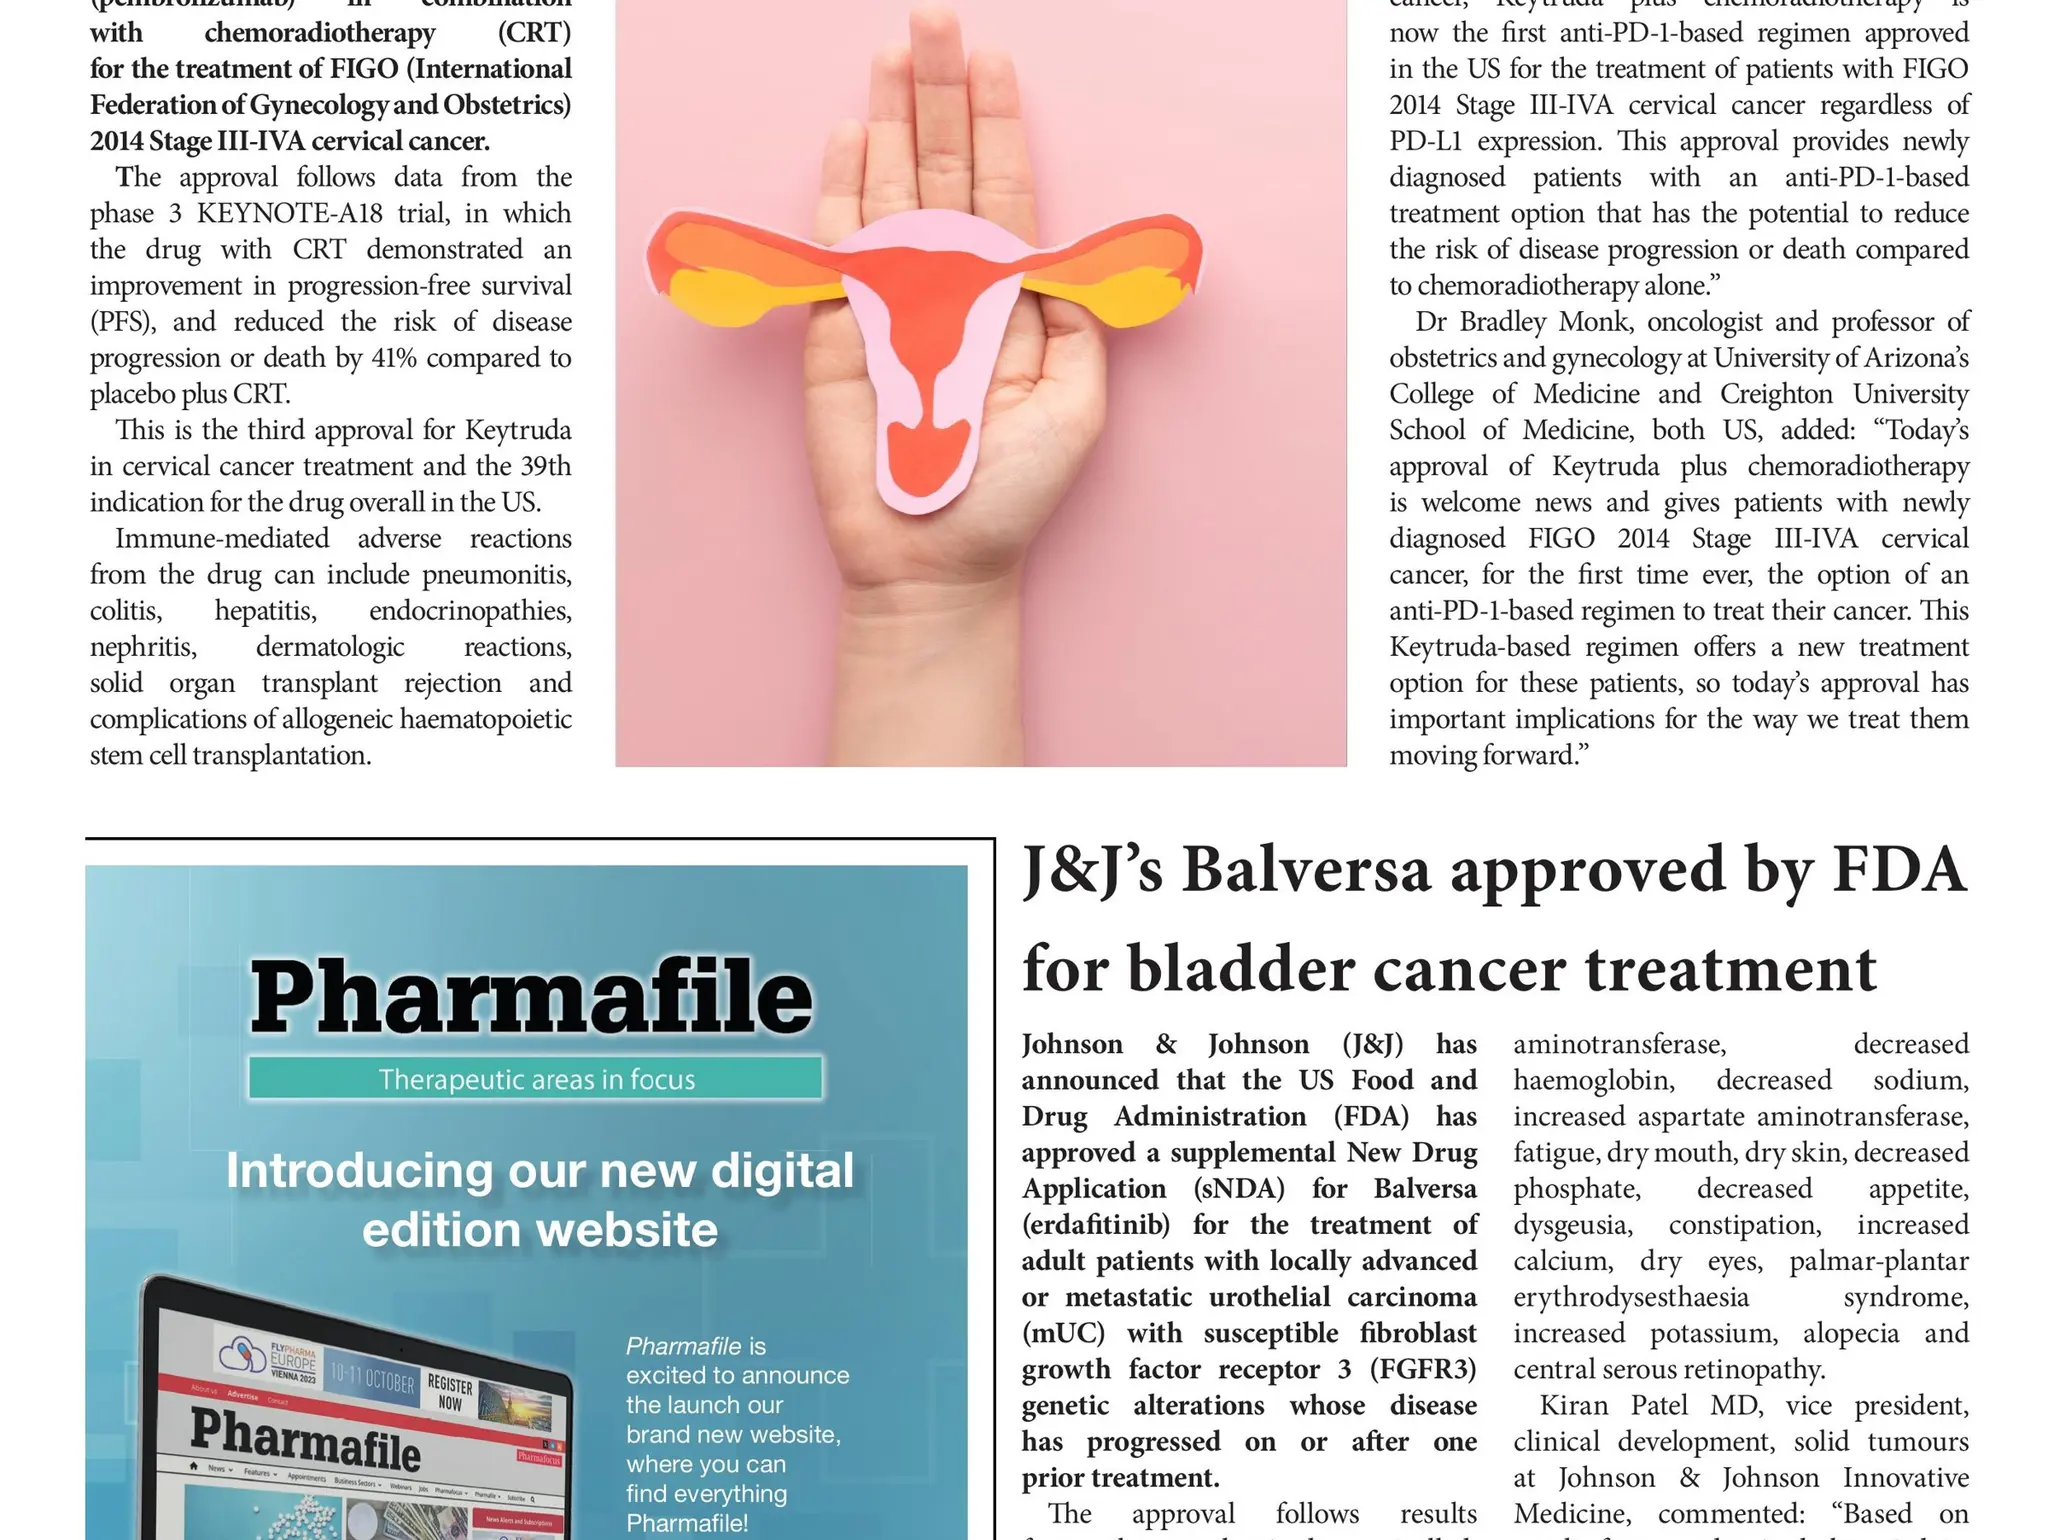 J&J’s Balversa approved by FDA for bladder cancer treatment